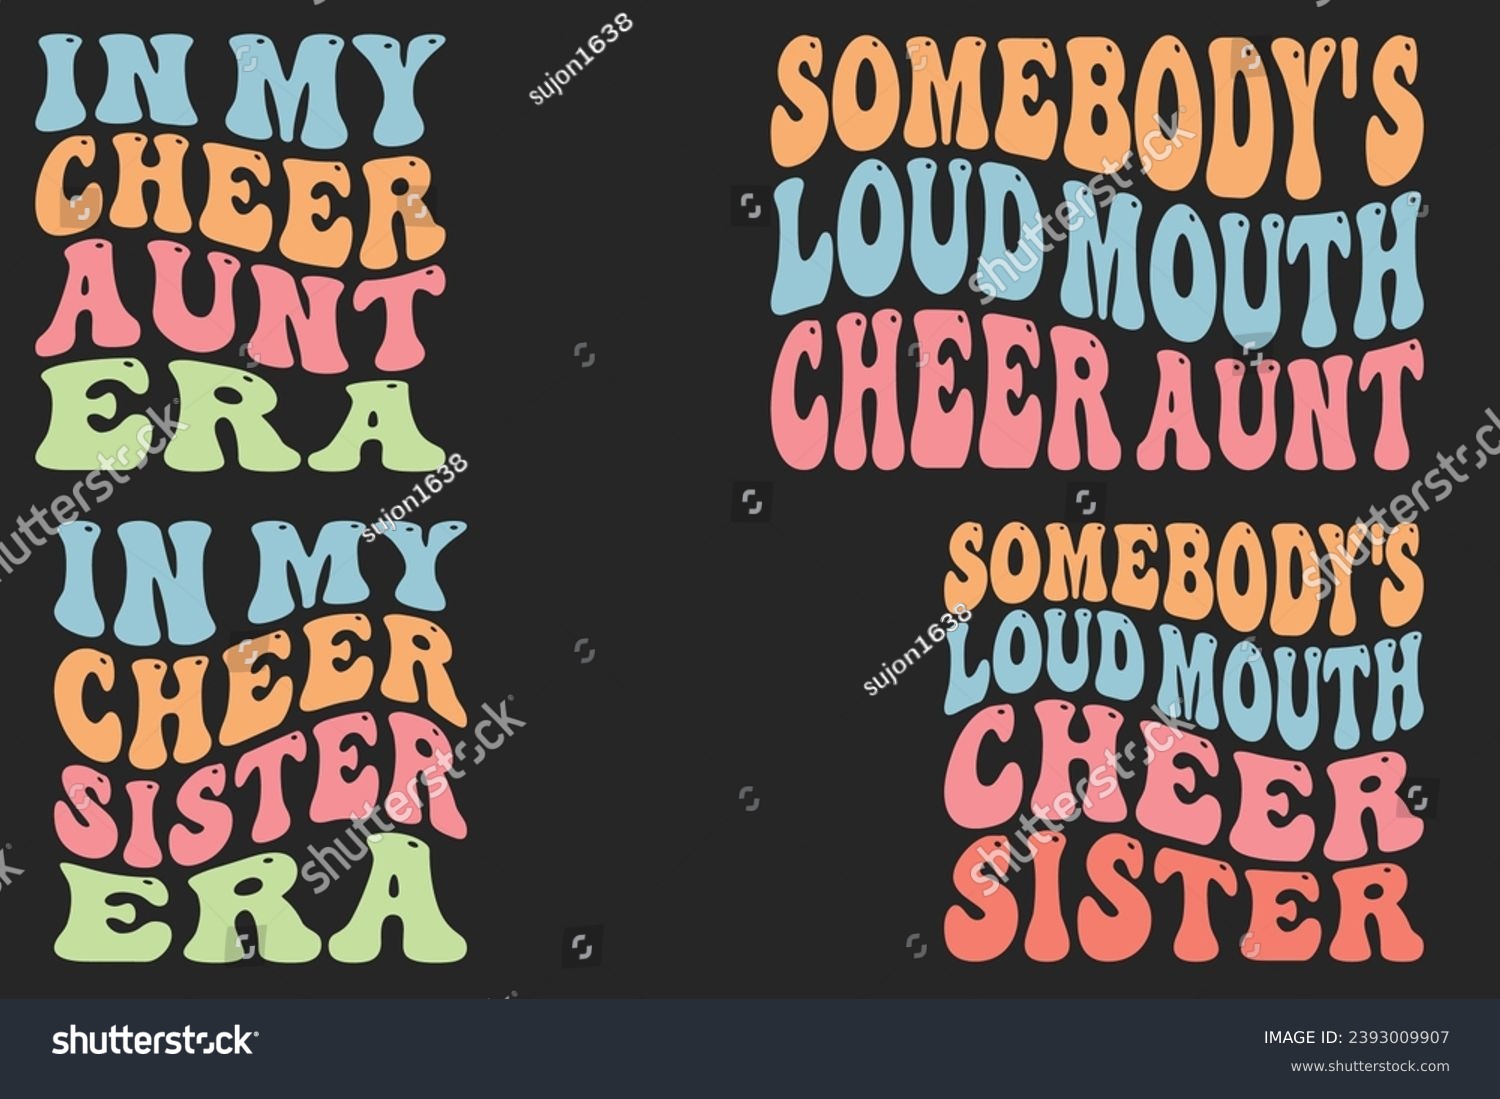 SVG of In my Cheer aunt era, Somebody's Loud Mouth Cheer aunt, in my Cheer sister era, Somebody's Loud Mouth Cheer sister retro wavy T-shirt designs svg